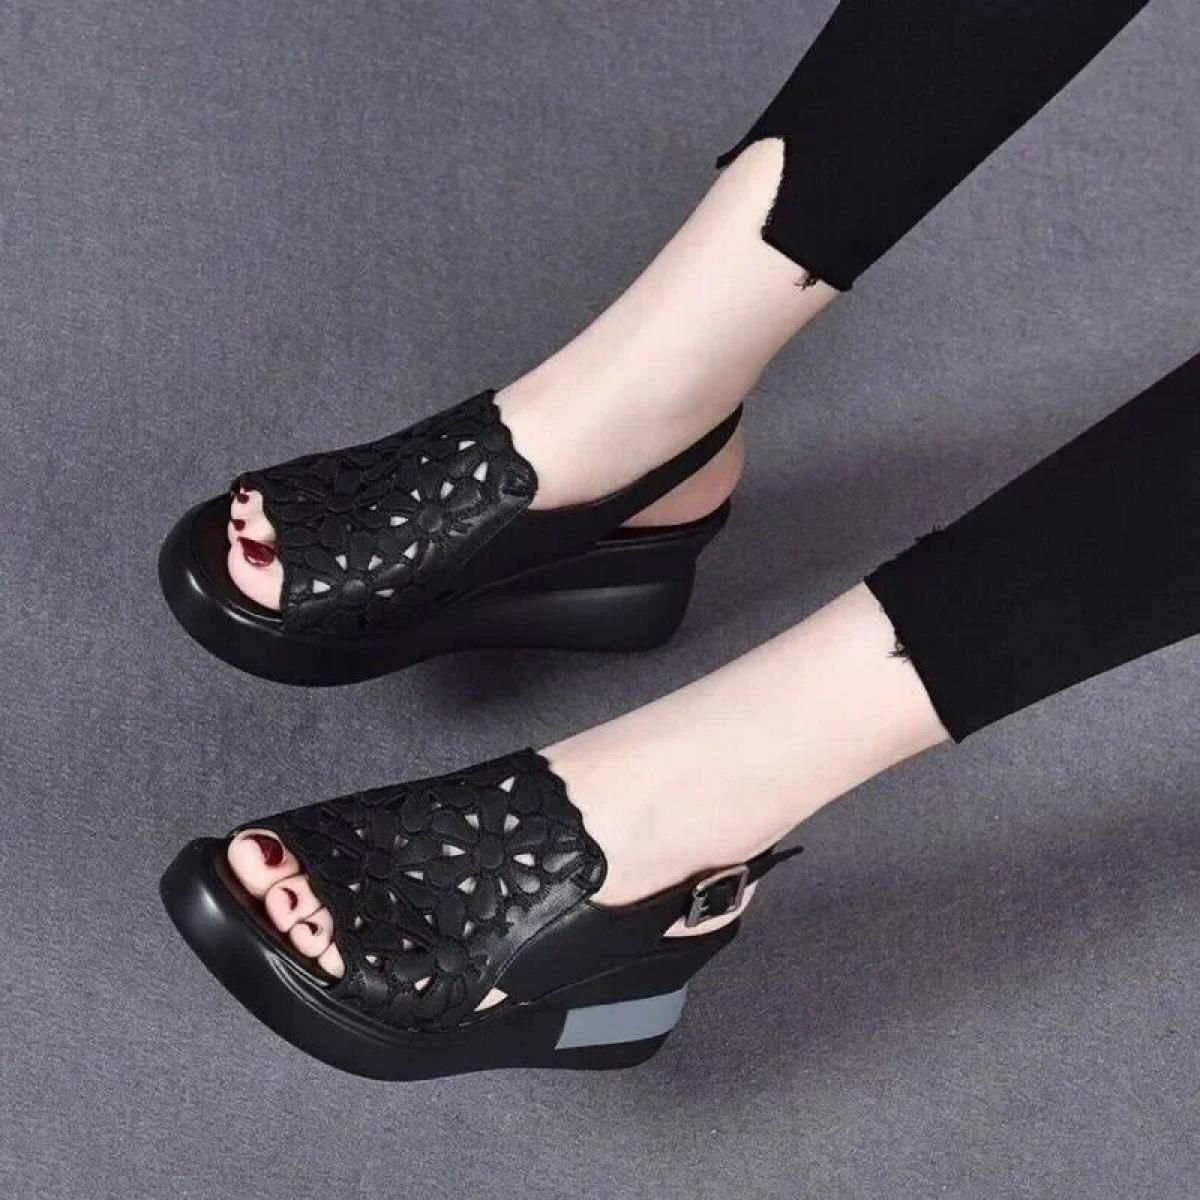 Summer Wedge Shoes For Women Sandals Open Toe Platform Hollow Flowers Retro Lady High Heel Buckle Strap Casual Female Sa